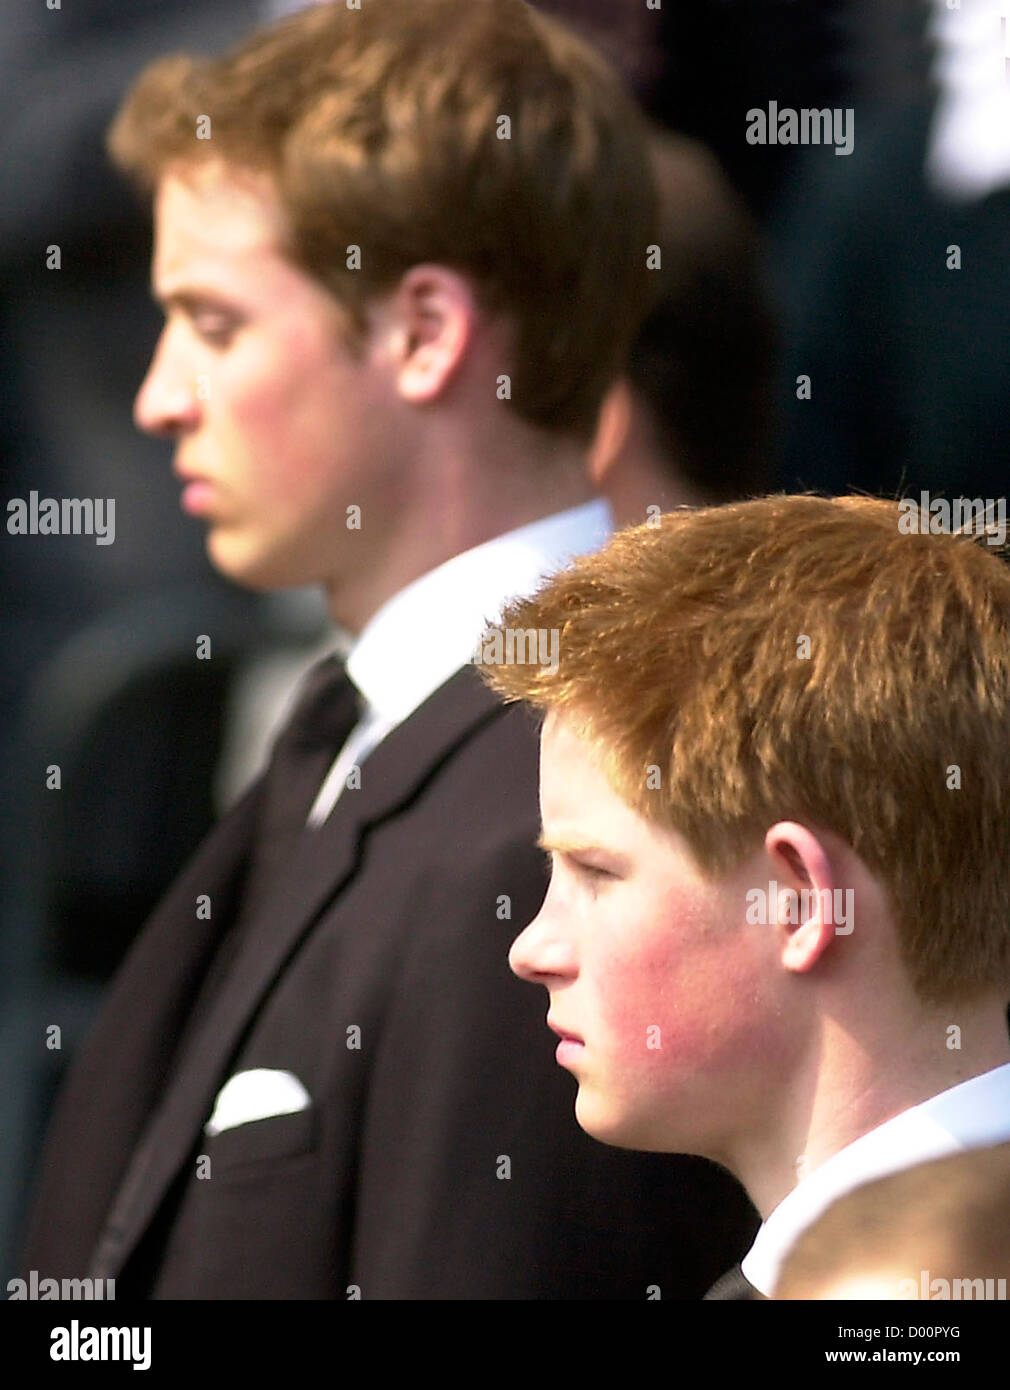 Prince William and Prince Harry during Queen Mother's funeral procession, Queen Mother's coffin during her funeral, public funeral of The Queen Mother Stock Photo